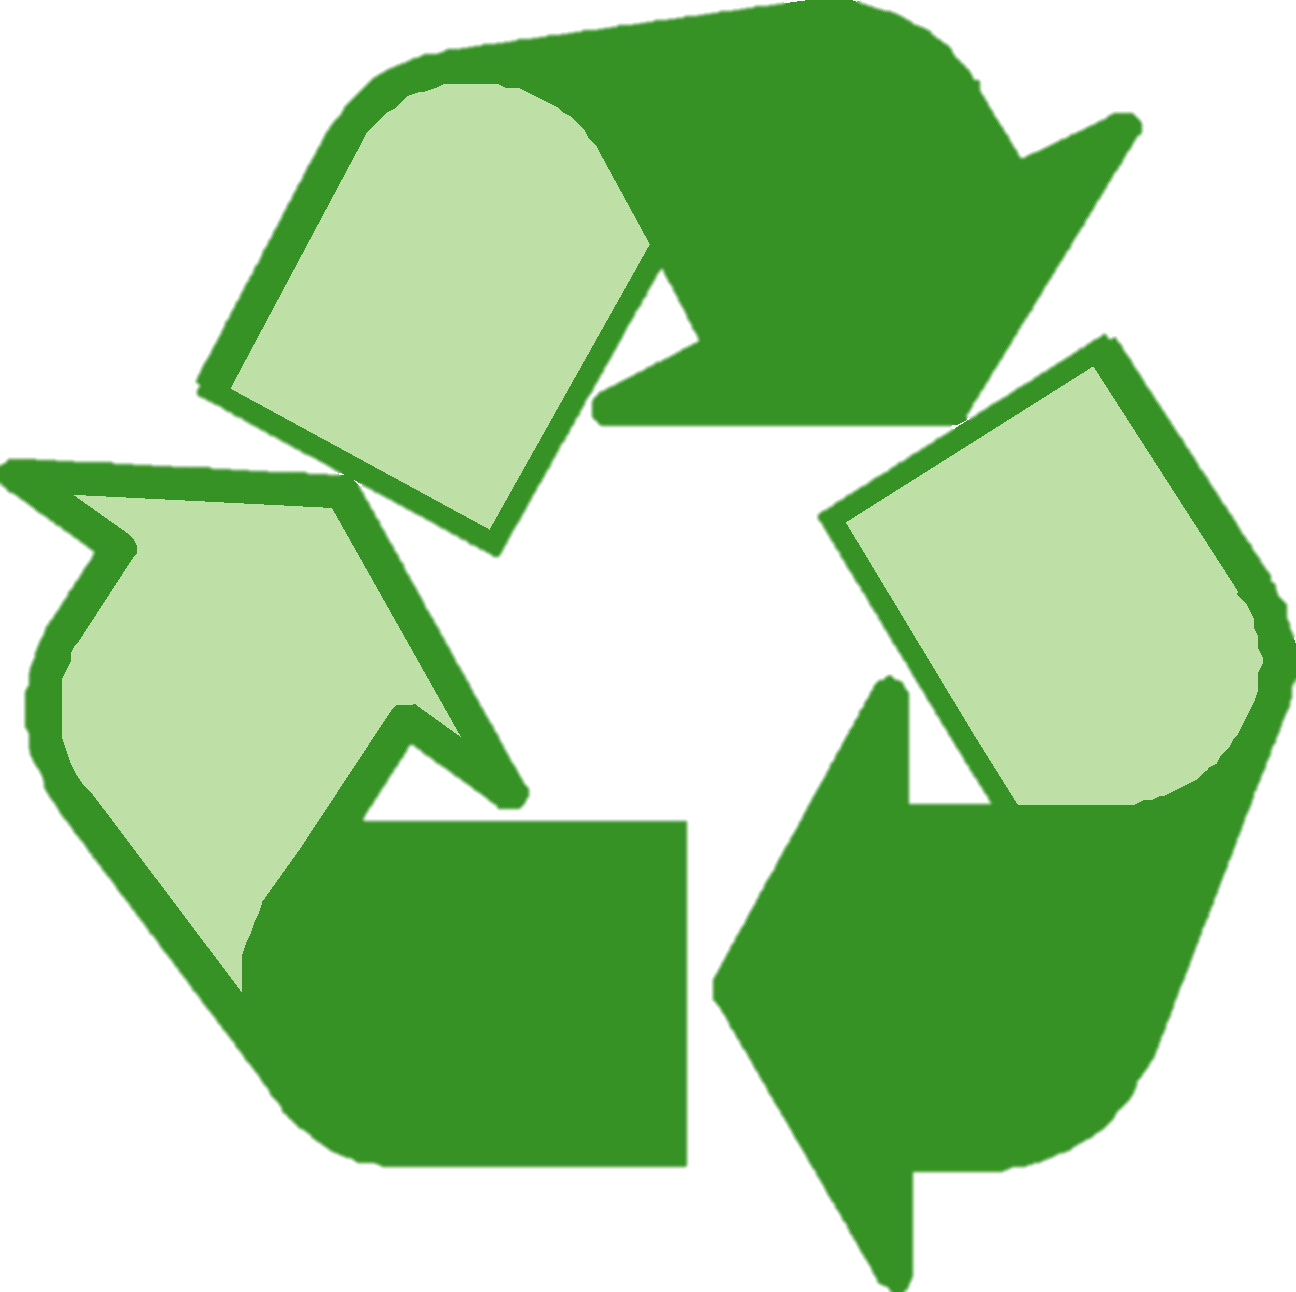 Over 75% Of Waste Is Recyclable, But We Only Recycle - Eco Friendly Product Logo (1296x1292)